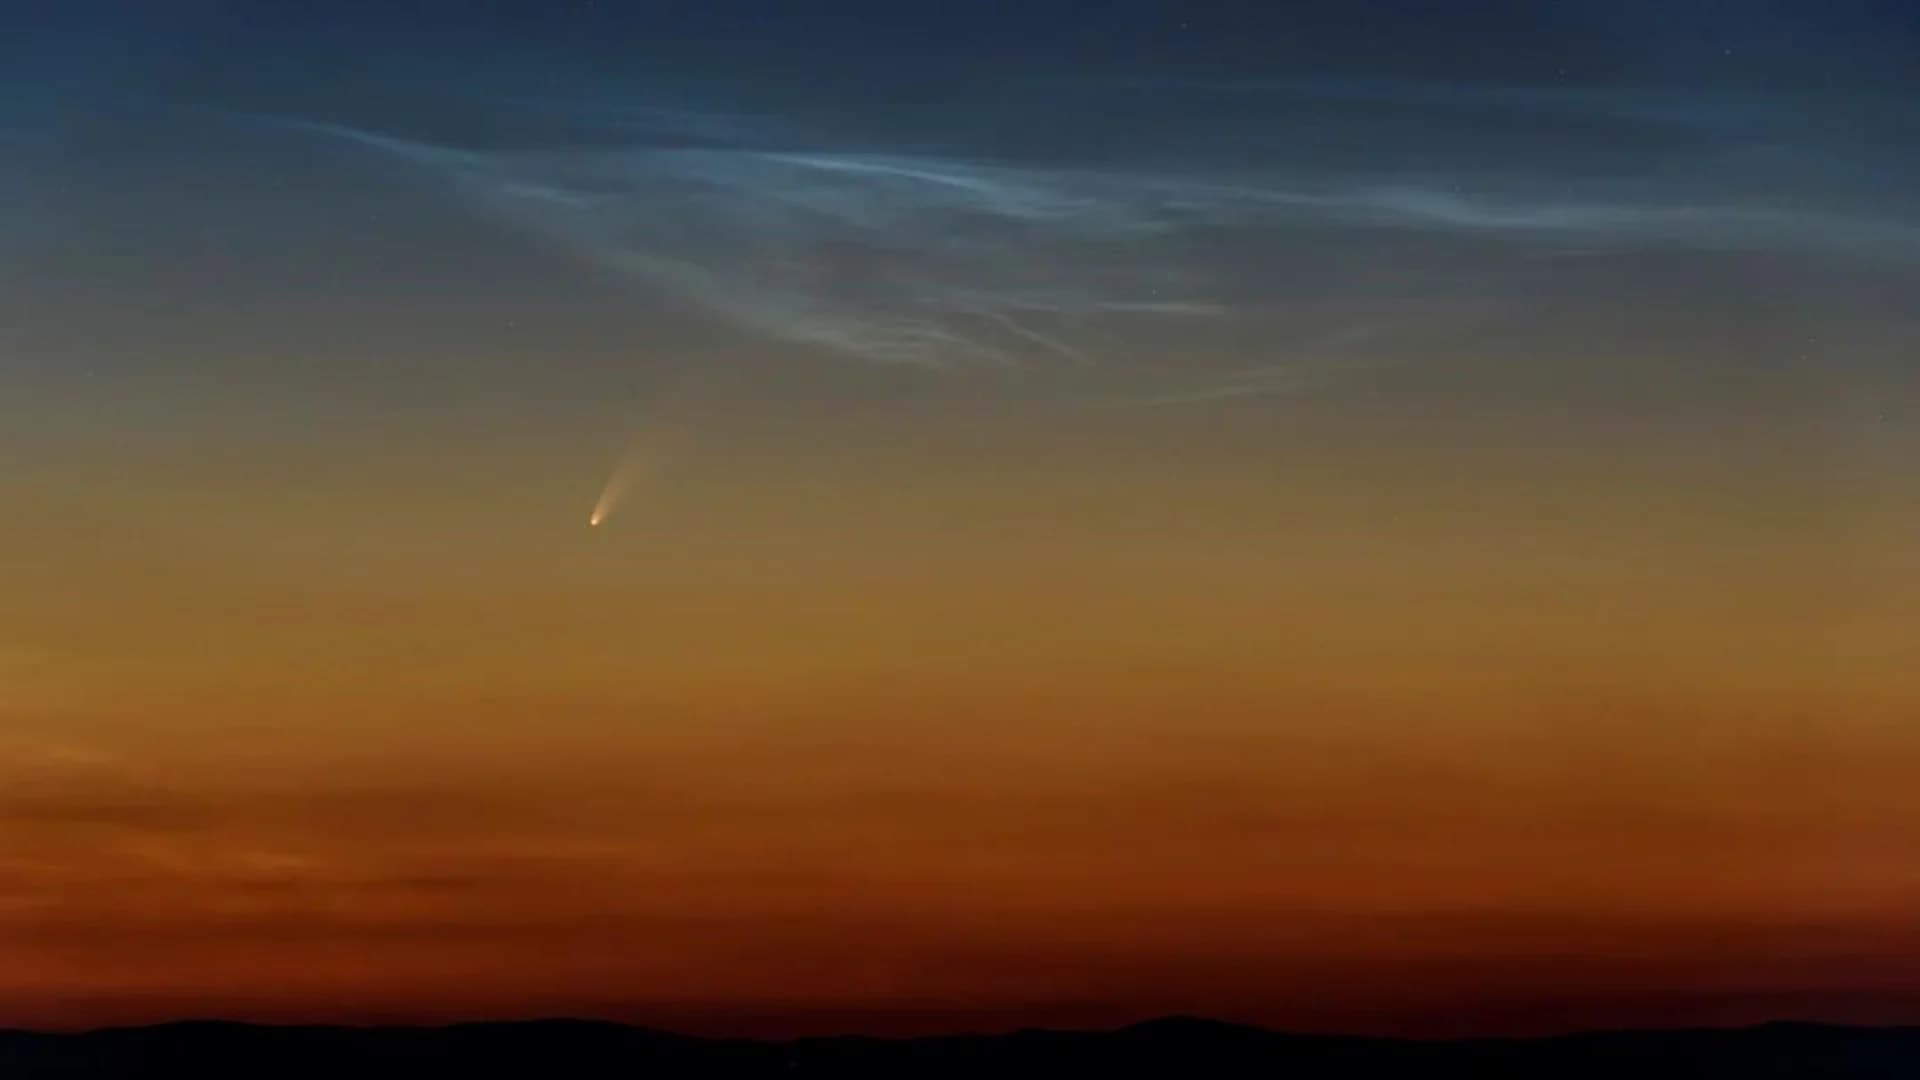 Comet NEOWISE putting on a rare celestial show